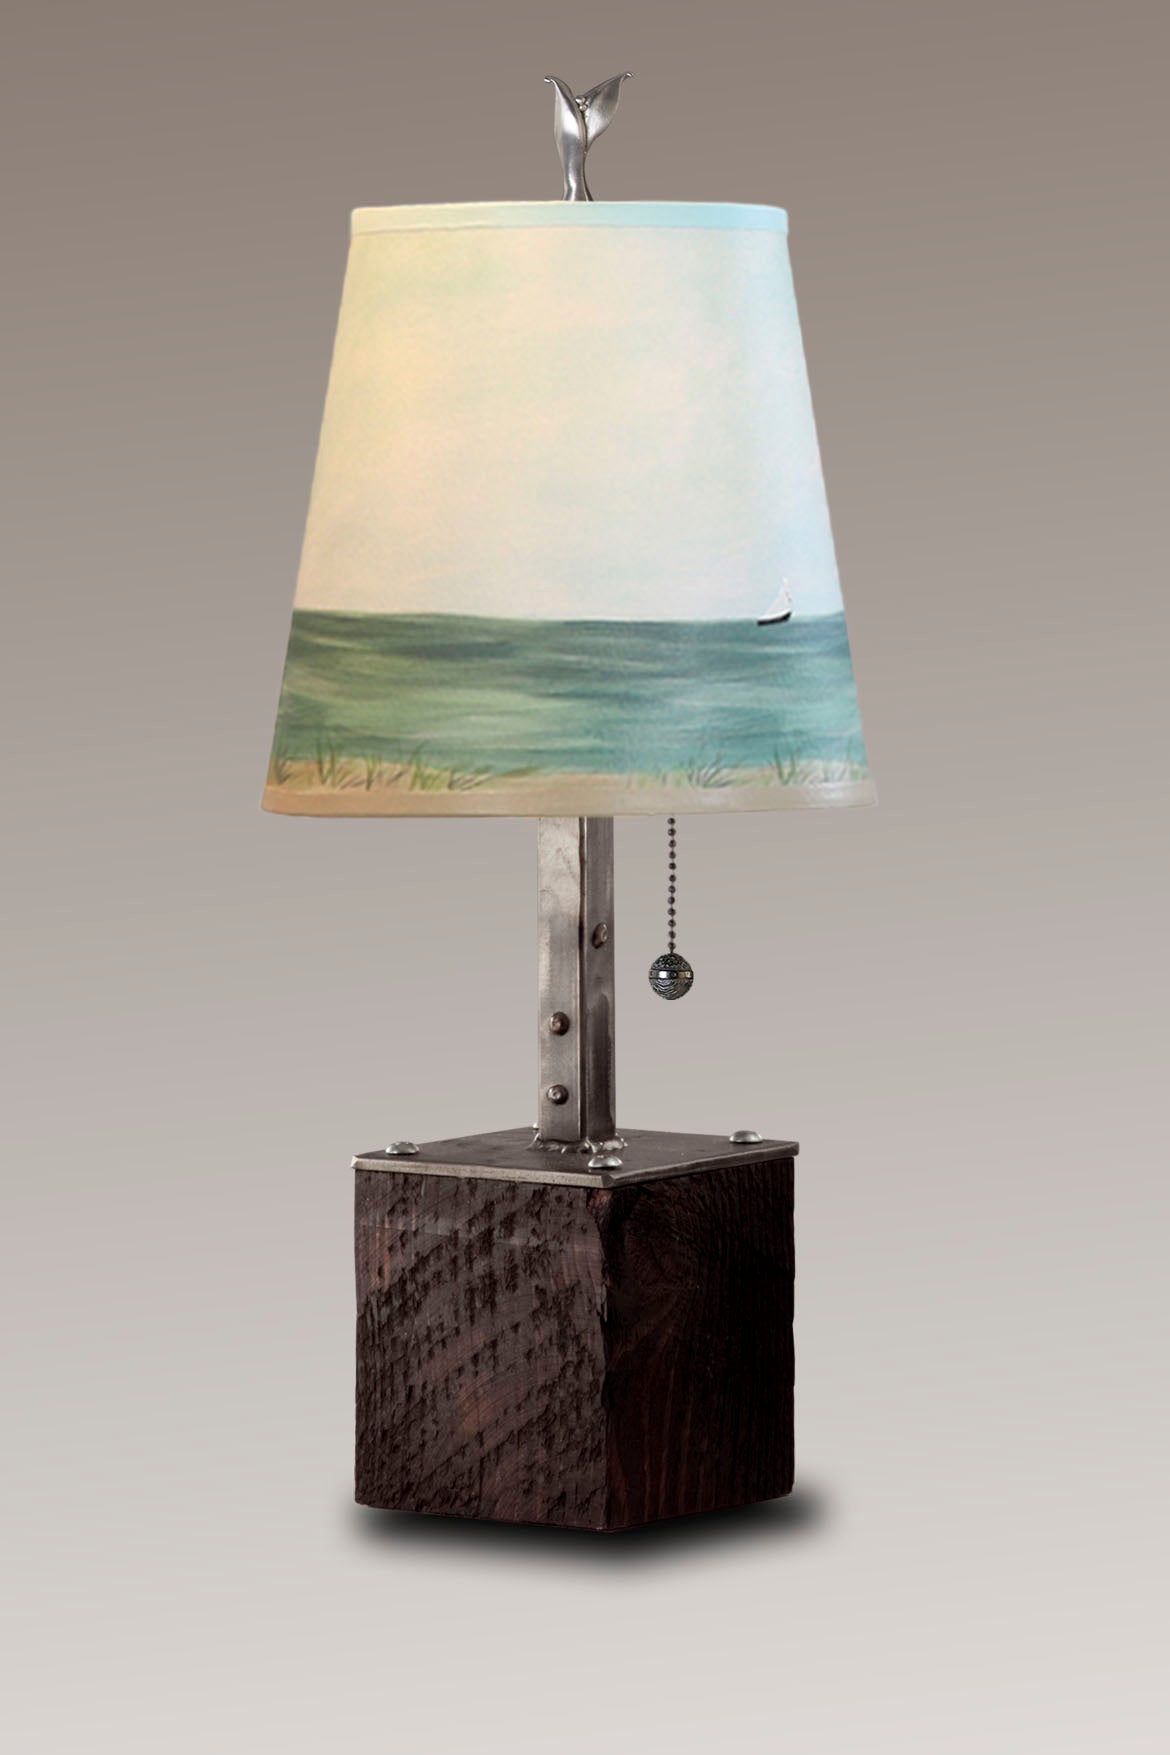 Janna Ugone &amp; Co Table Lamps Steel Table Lamp on Reclaimed Wood with Small Drum Shade in Shore